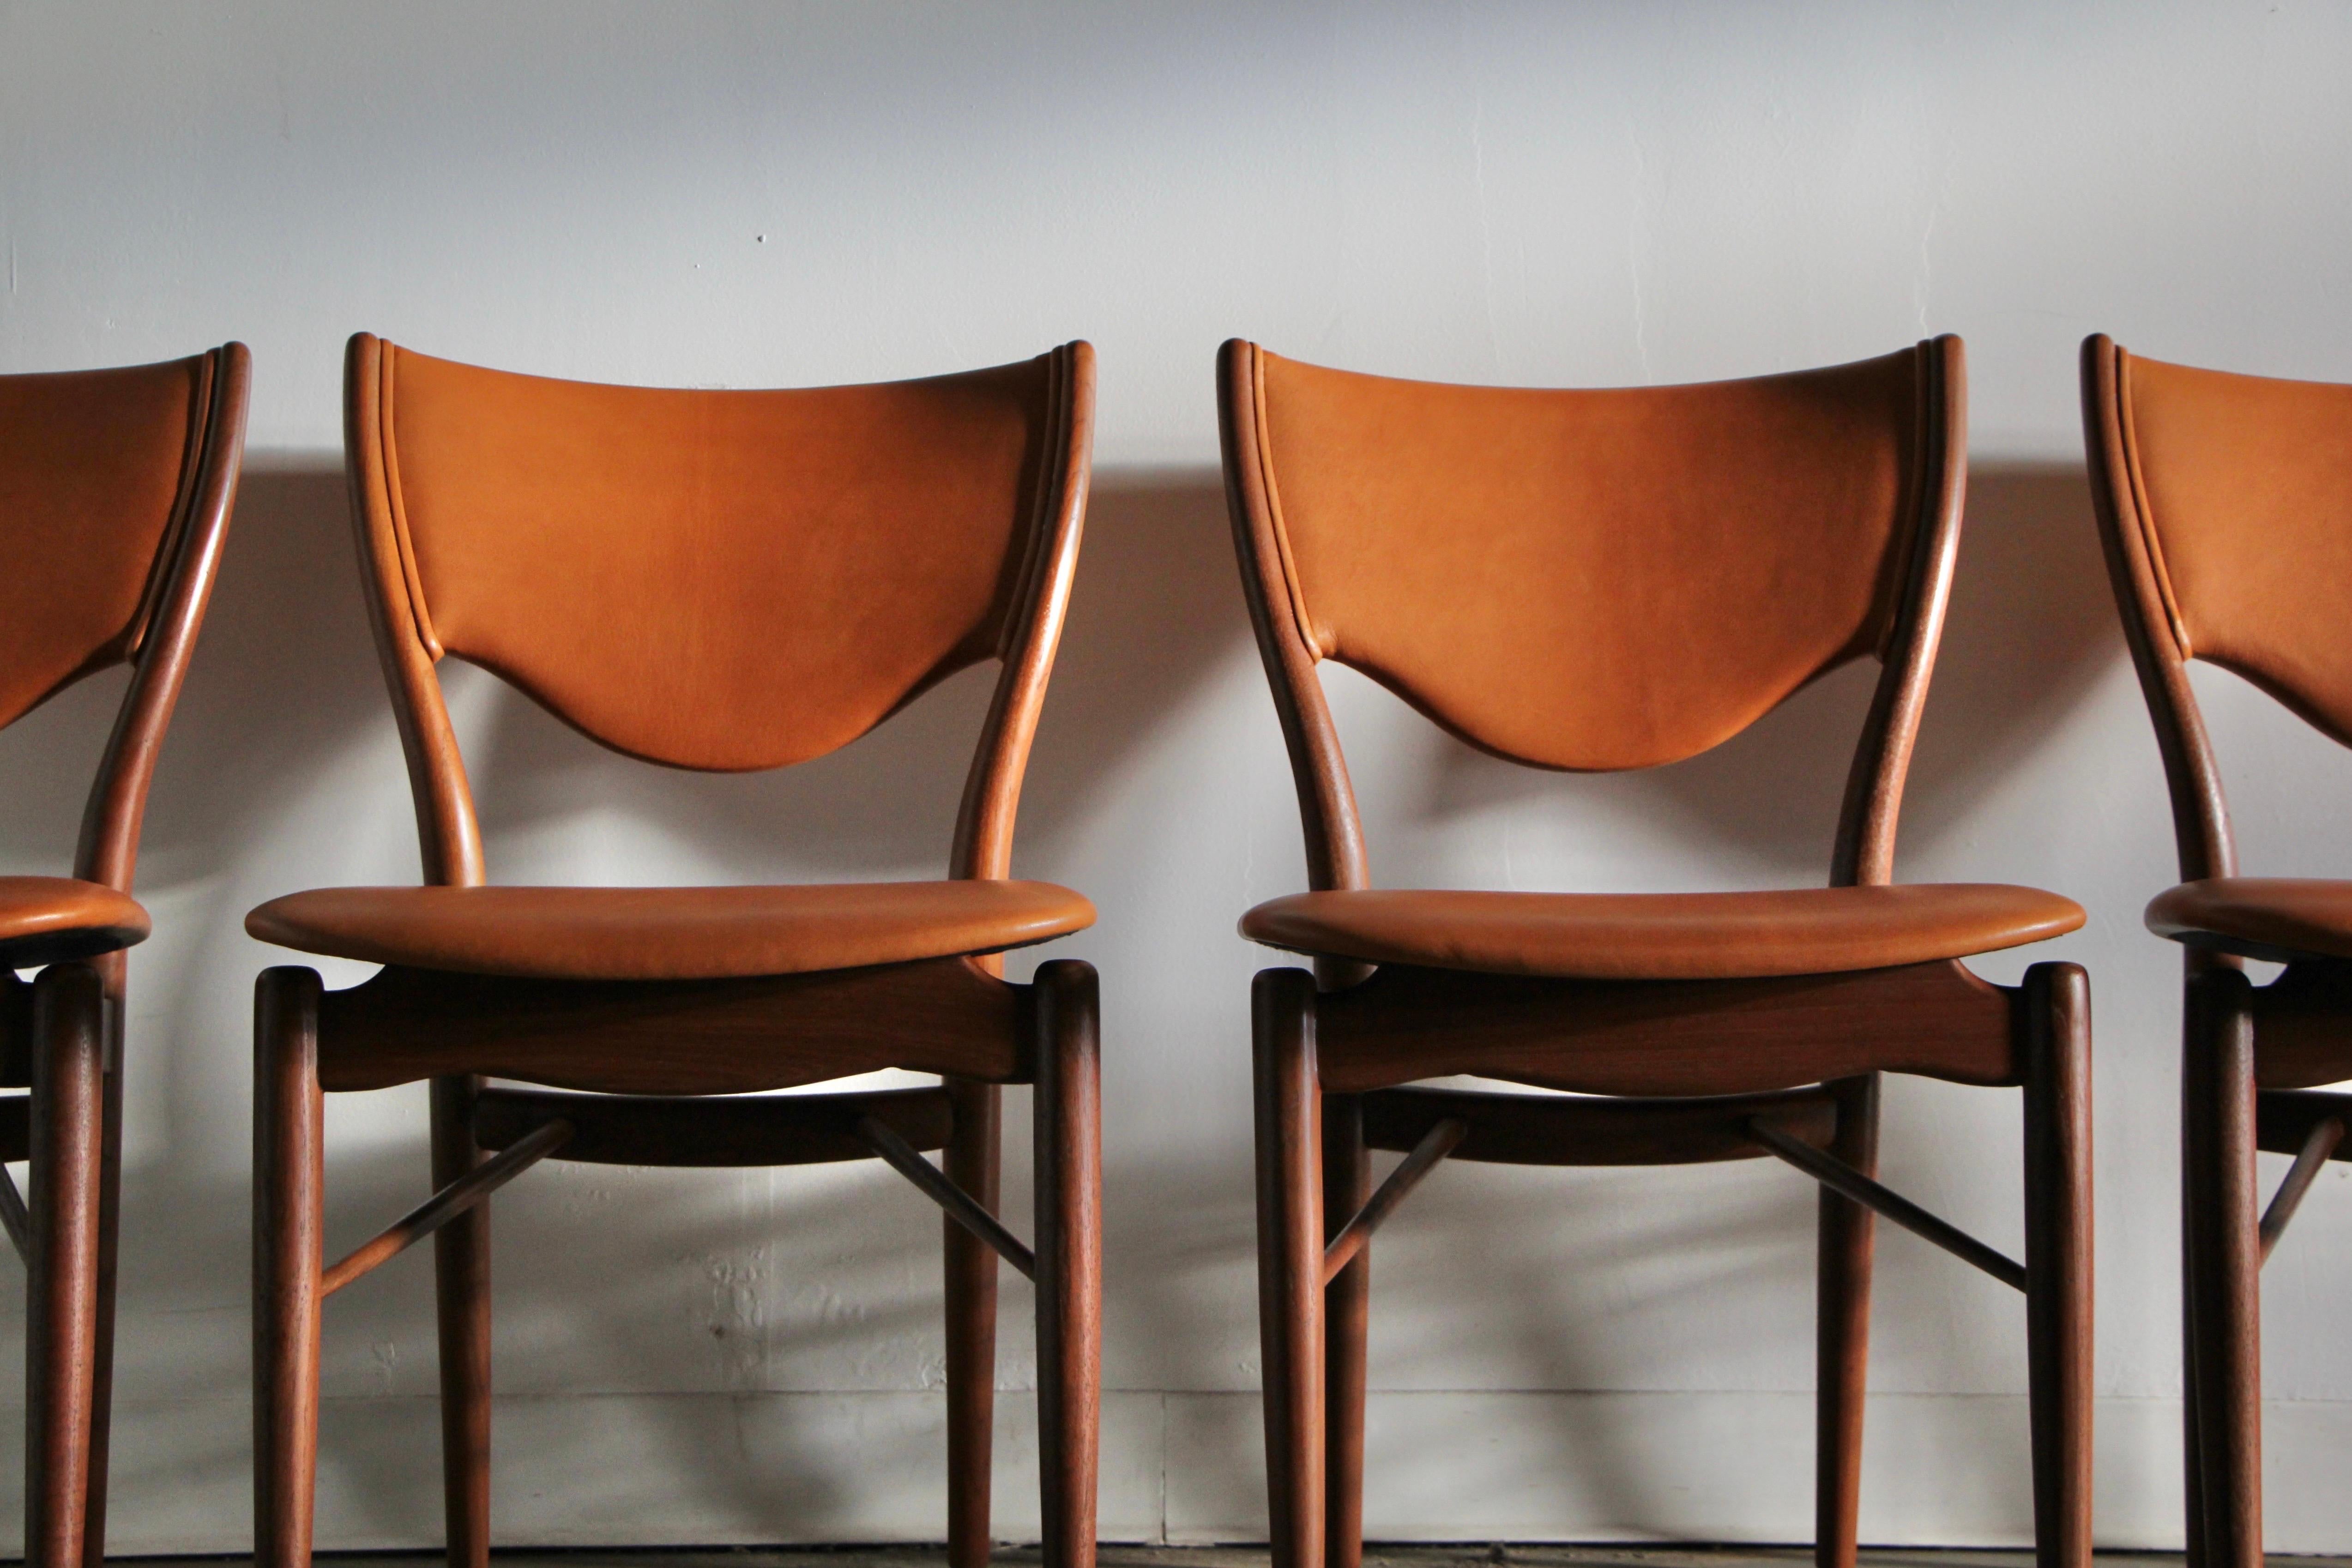 A jaw-dropping set of four Finn Juhl model “BO 63” sculpted teak dining chairs manufactured by Bovirke in the 1950s. This set has been newly and masterfully upholstered in cognac goatskin leather sourced from Italy. the leather will get more and